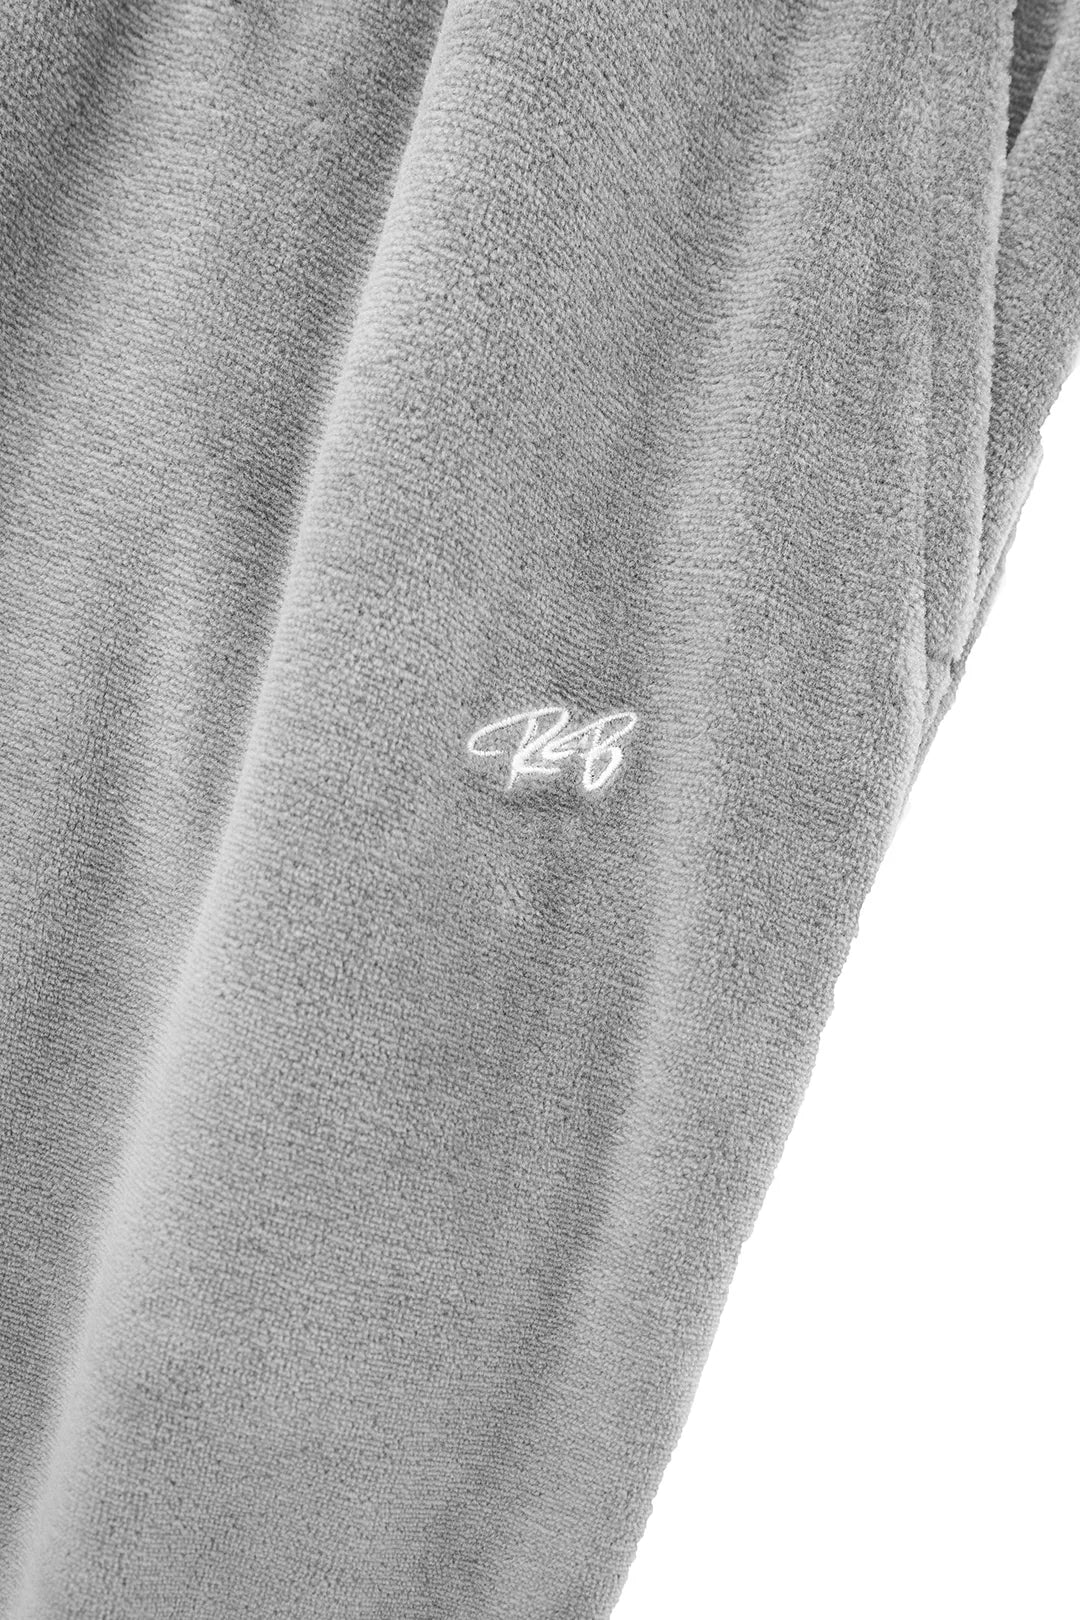 “RB  Collection”VELOR Sweatpants